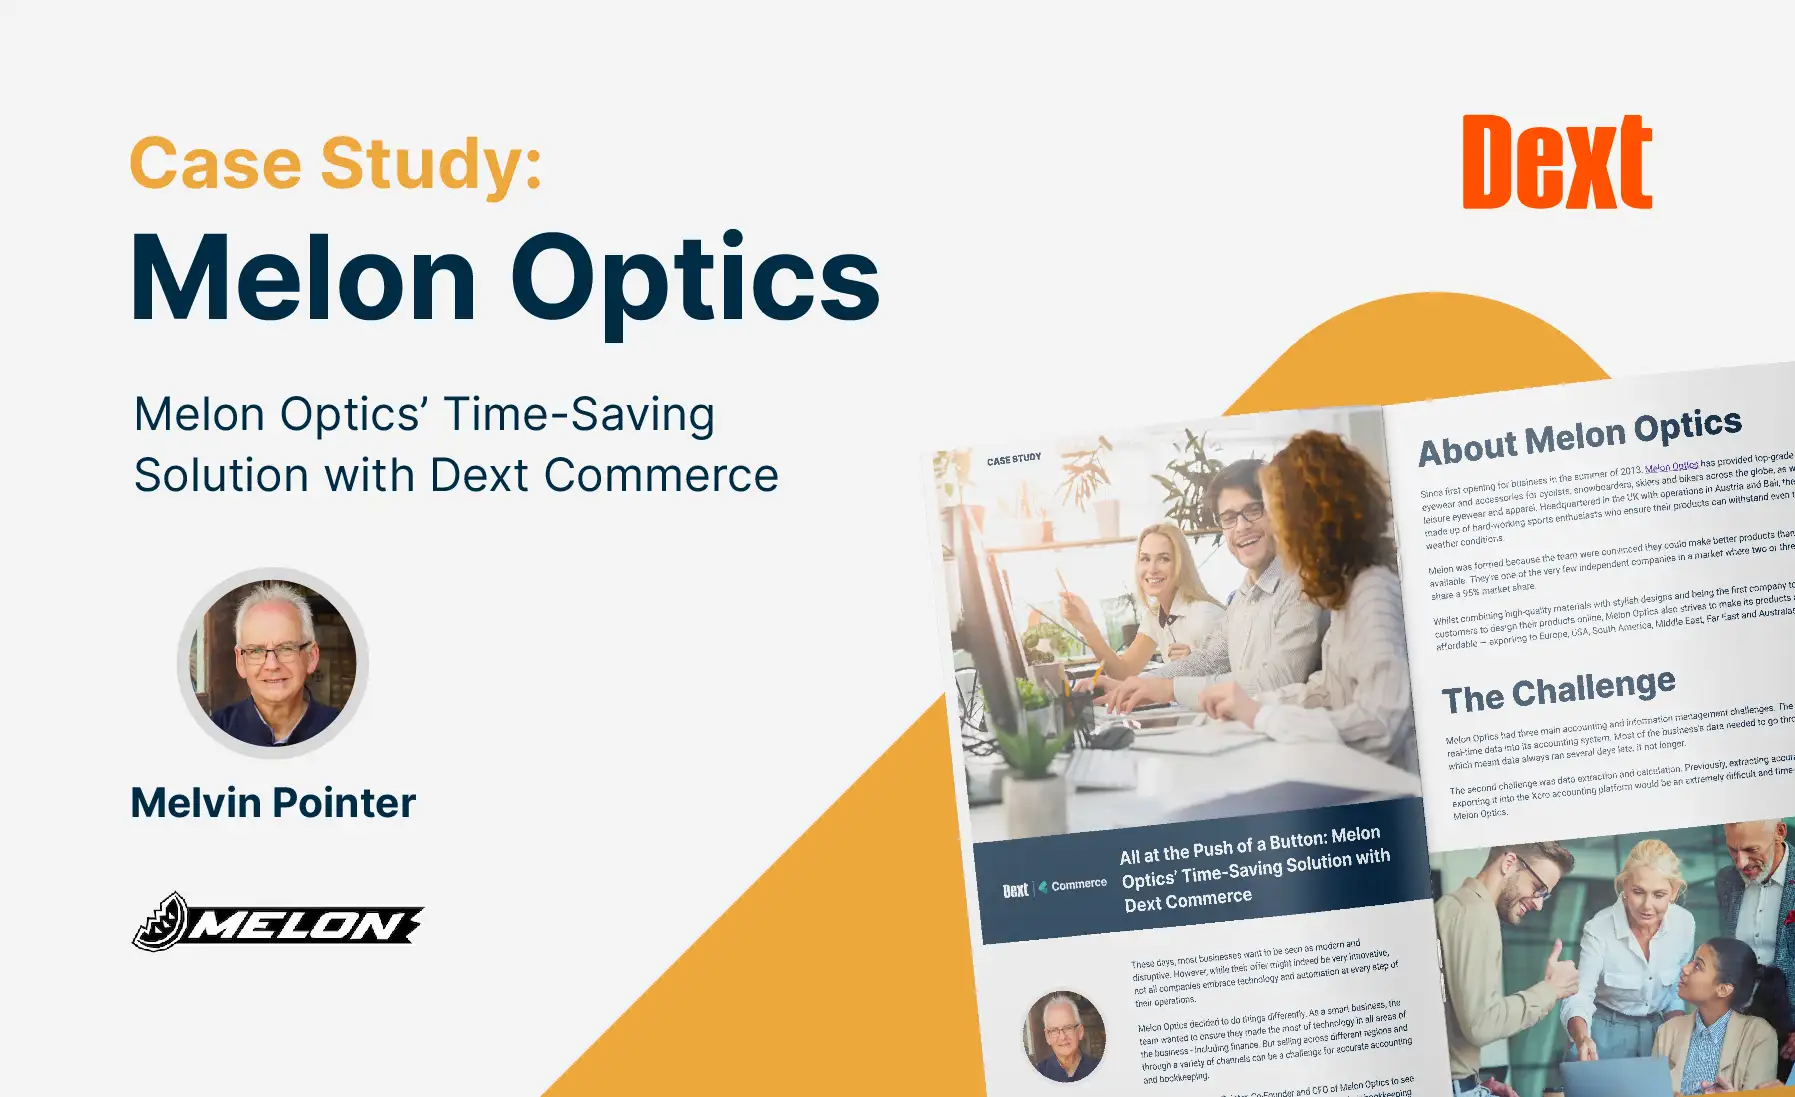 All at the Push of a Button: Melon Optics’ Time-Saving Solution with Dext Commerce logo